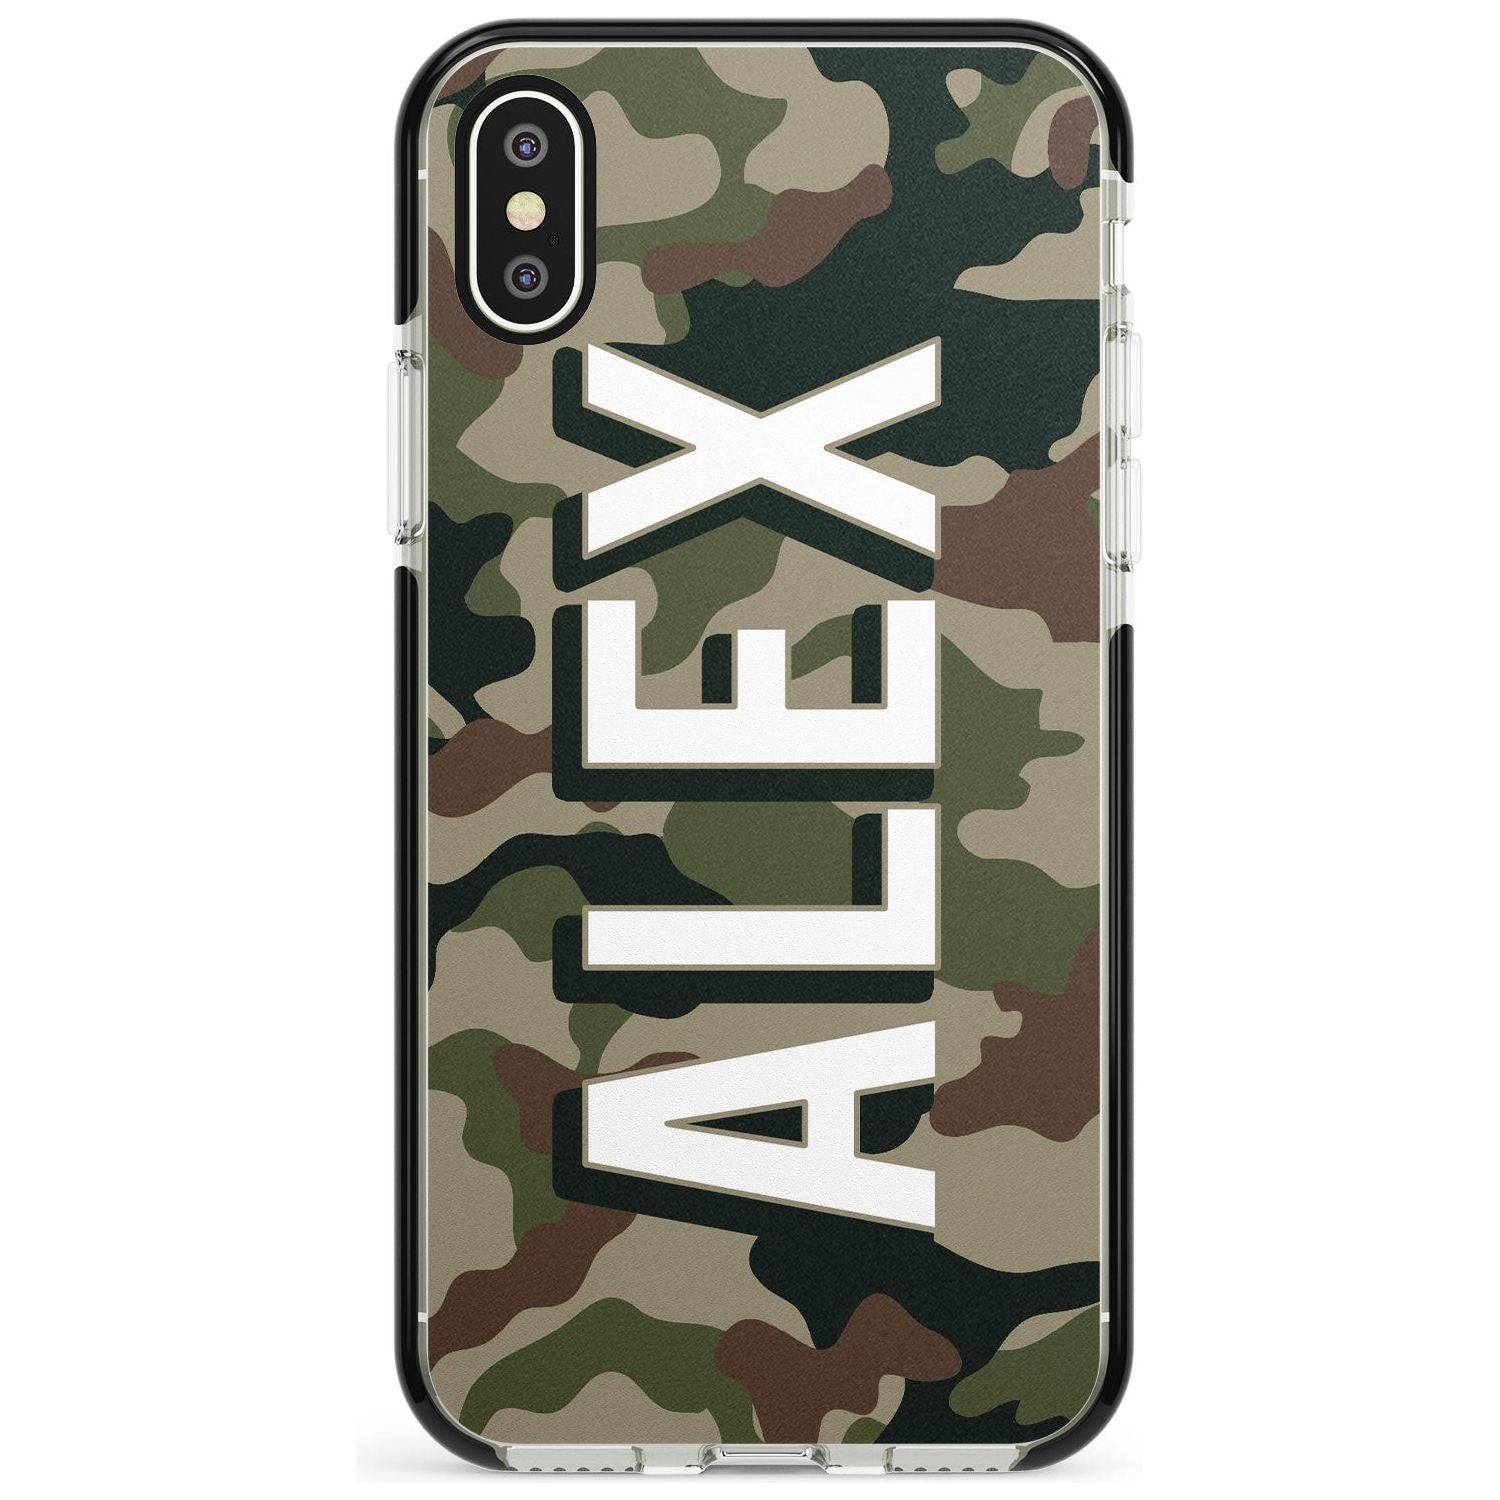 Classic Green Camo Pink Fade Impact Phone Case for iPhone X XS Max XR